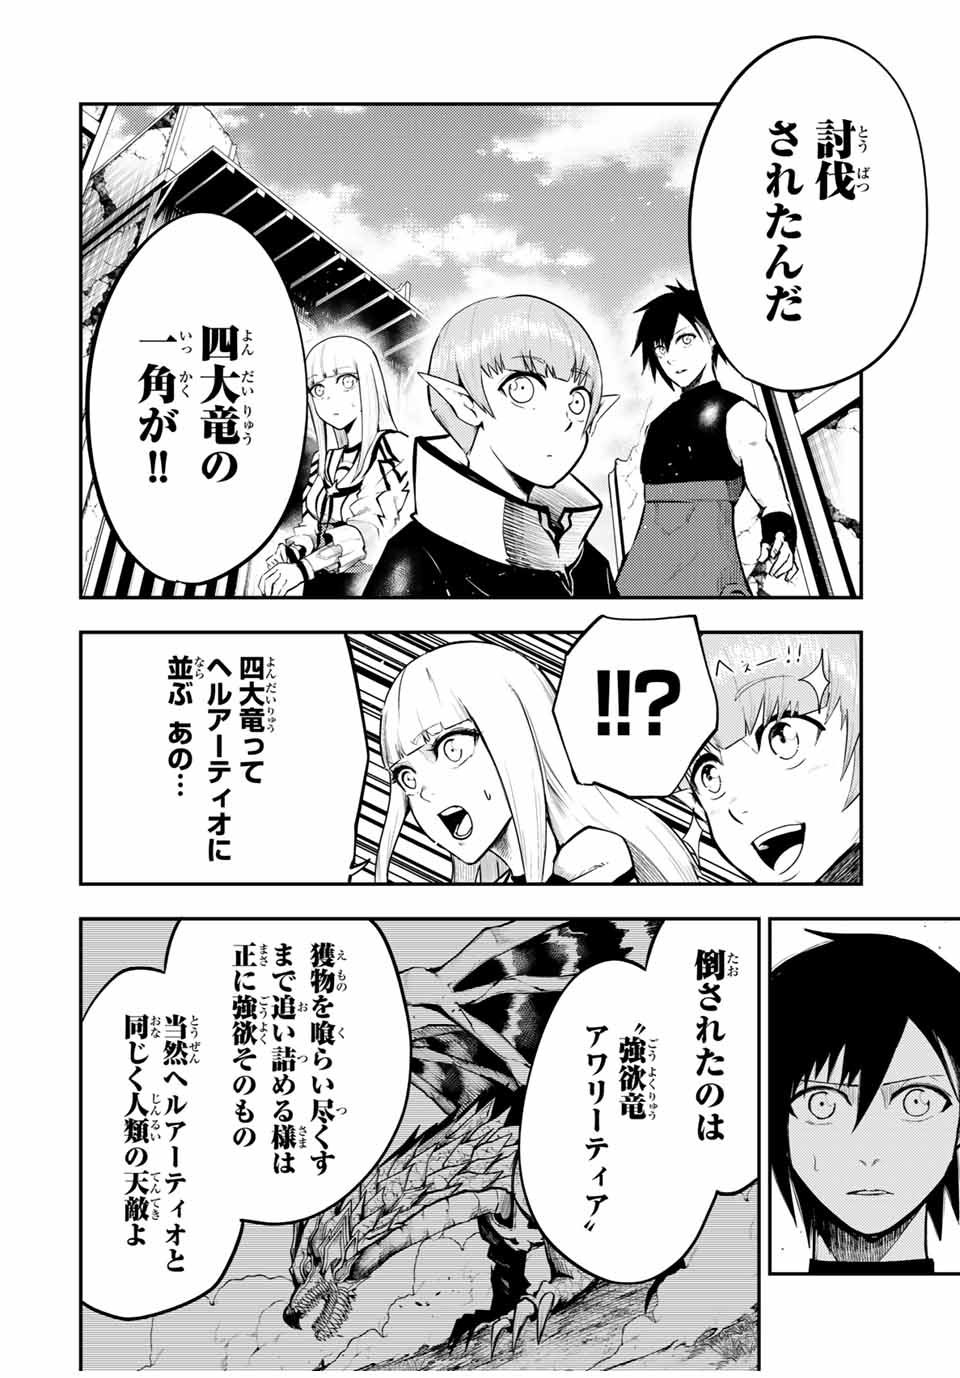 the strongest former prince-; 奴隷転生 ～その奴隷、最強の元王子につき～ 第50話 - Page 18